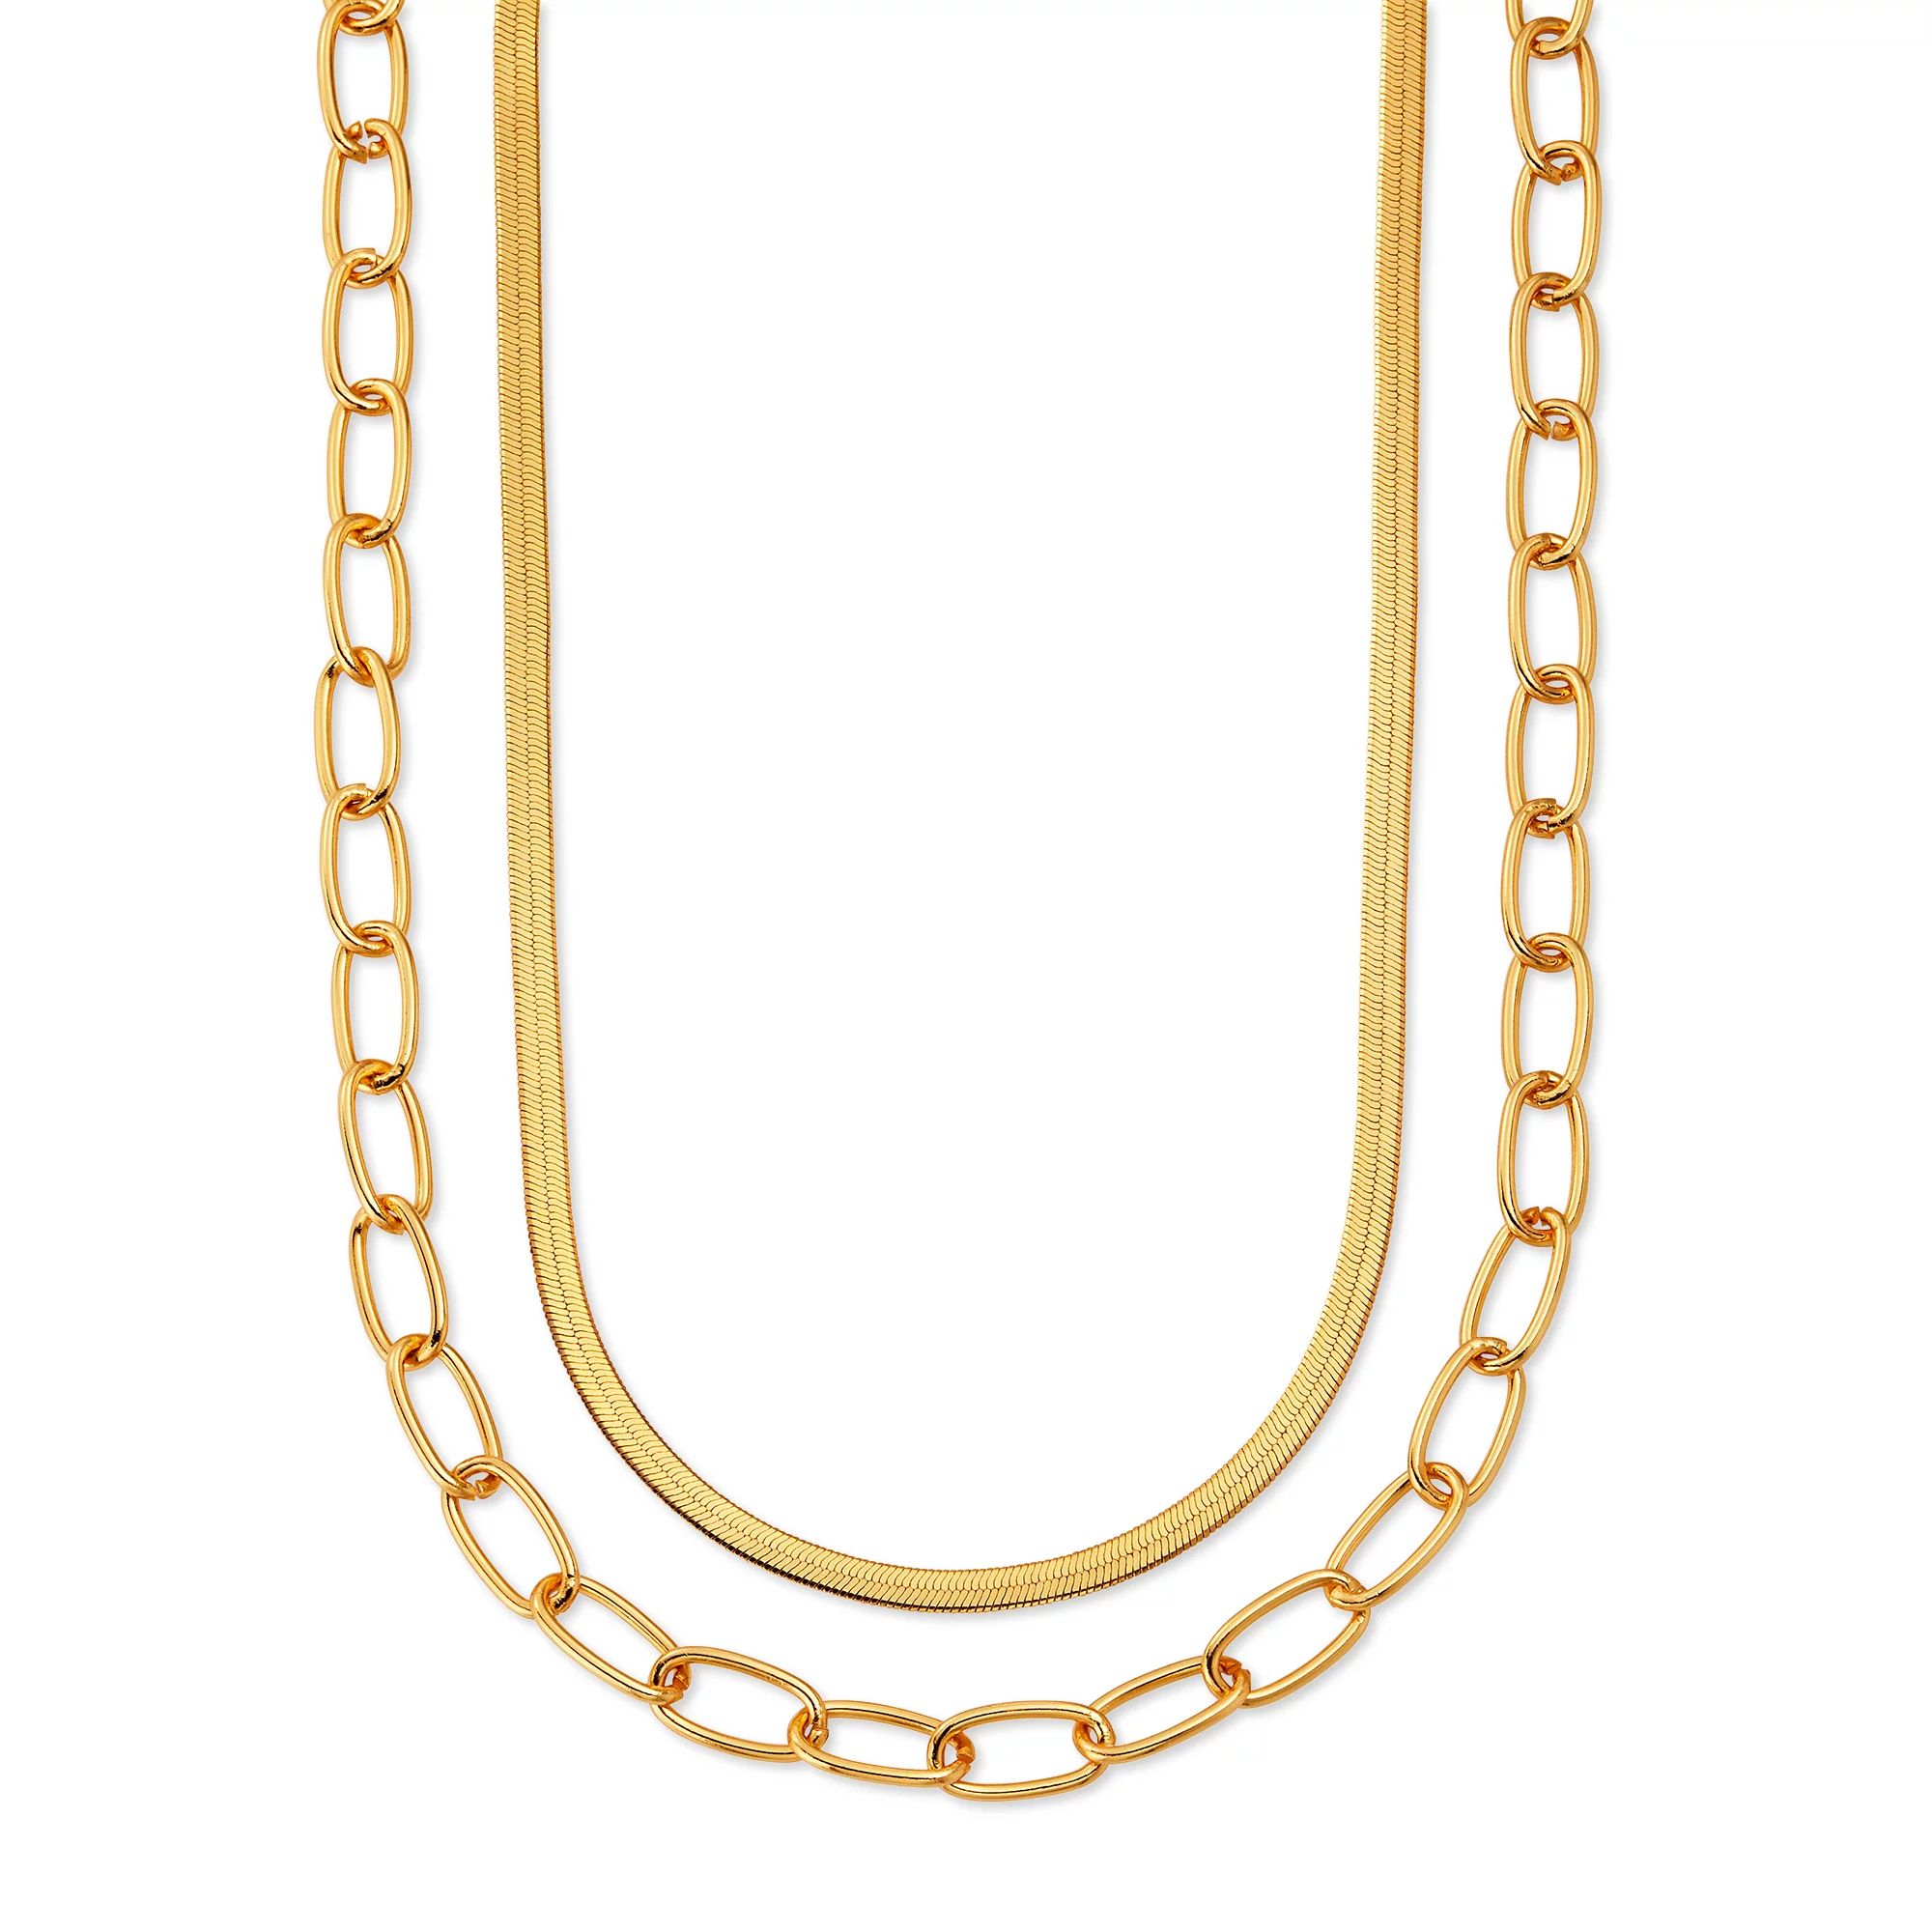 Scoop - Scoop 14KT Gold Flash Plated Brass Layered Herringbone and Link Chain Necklace, 15" + 3" ... | Walmart (US)